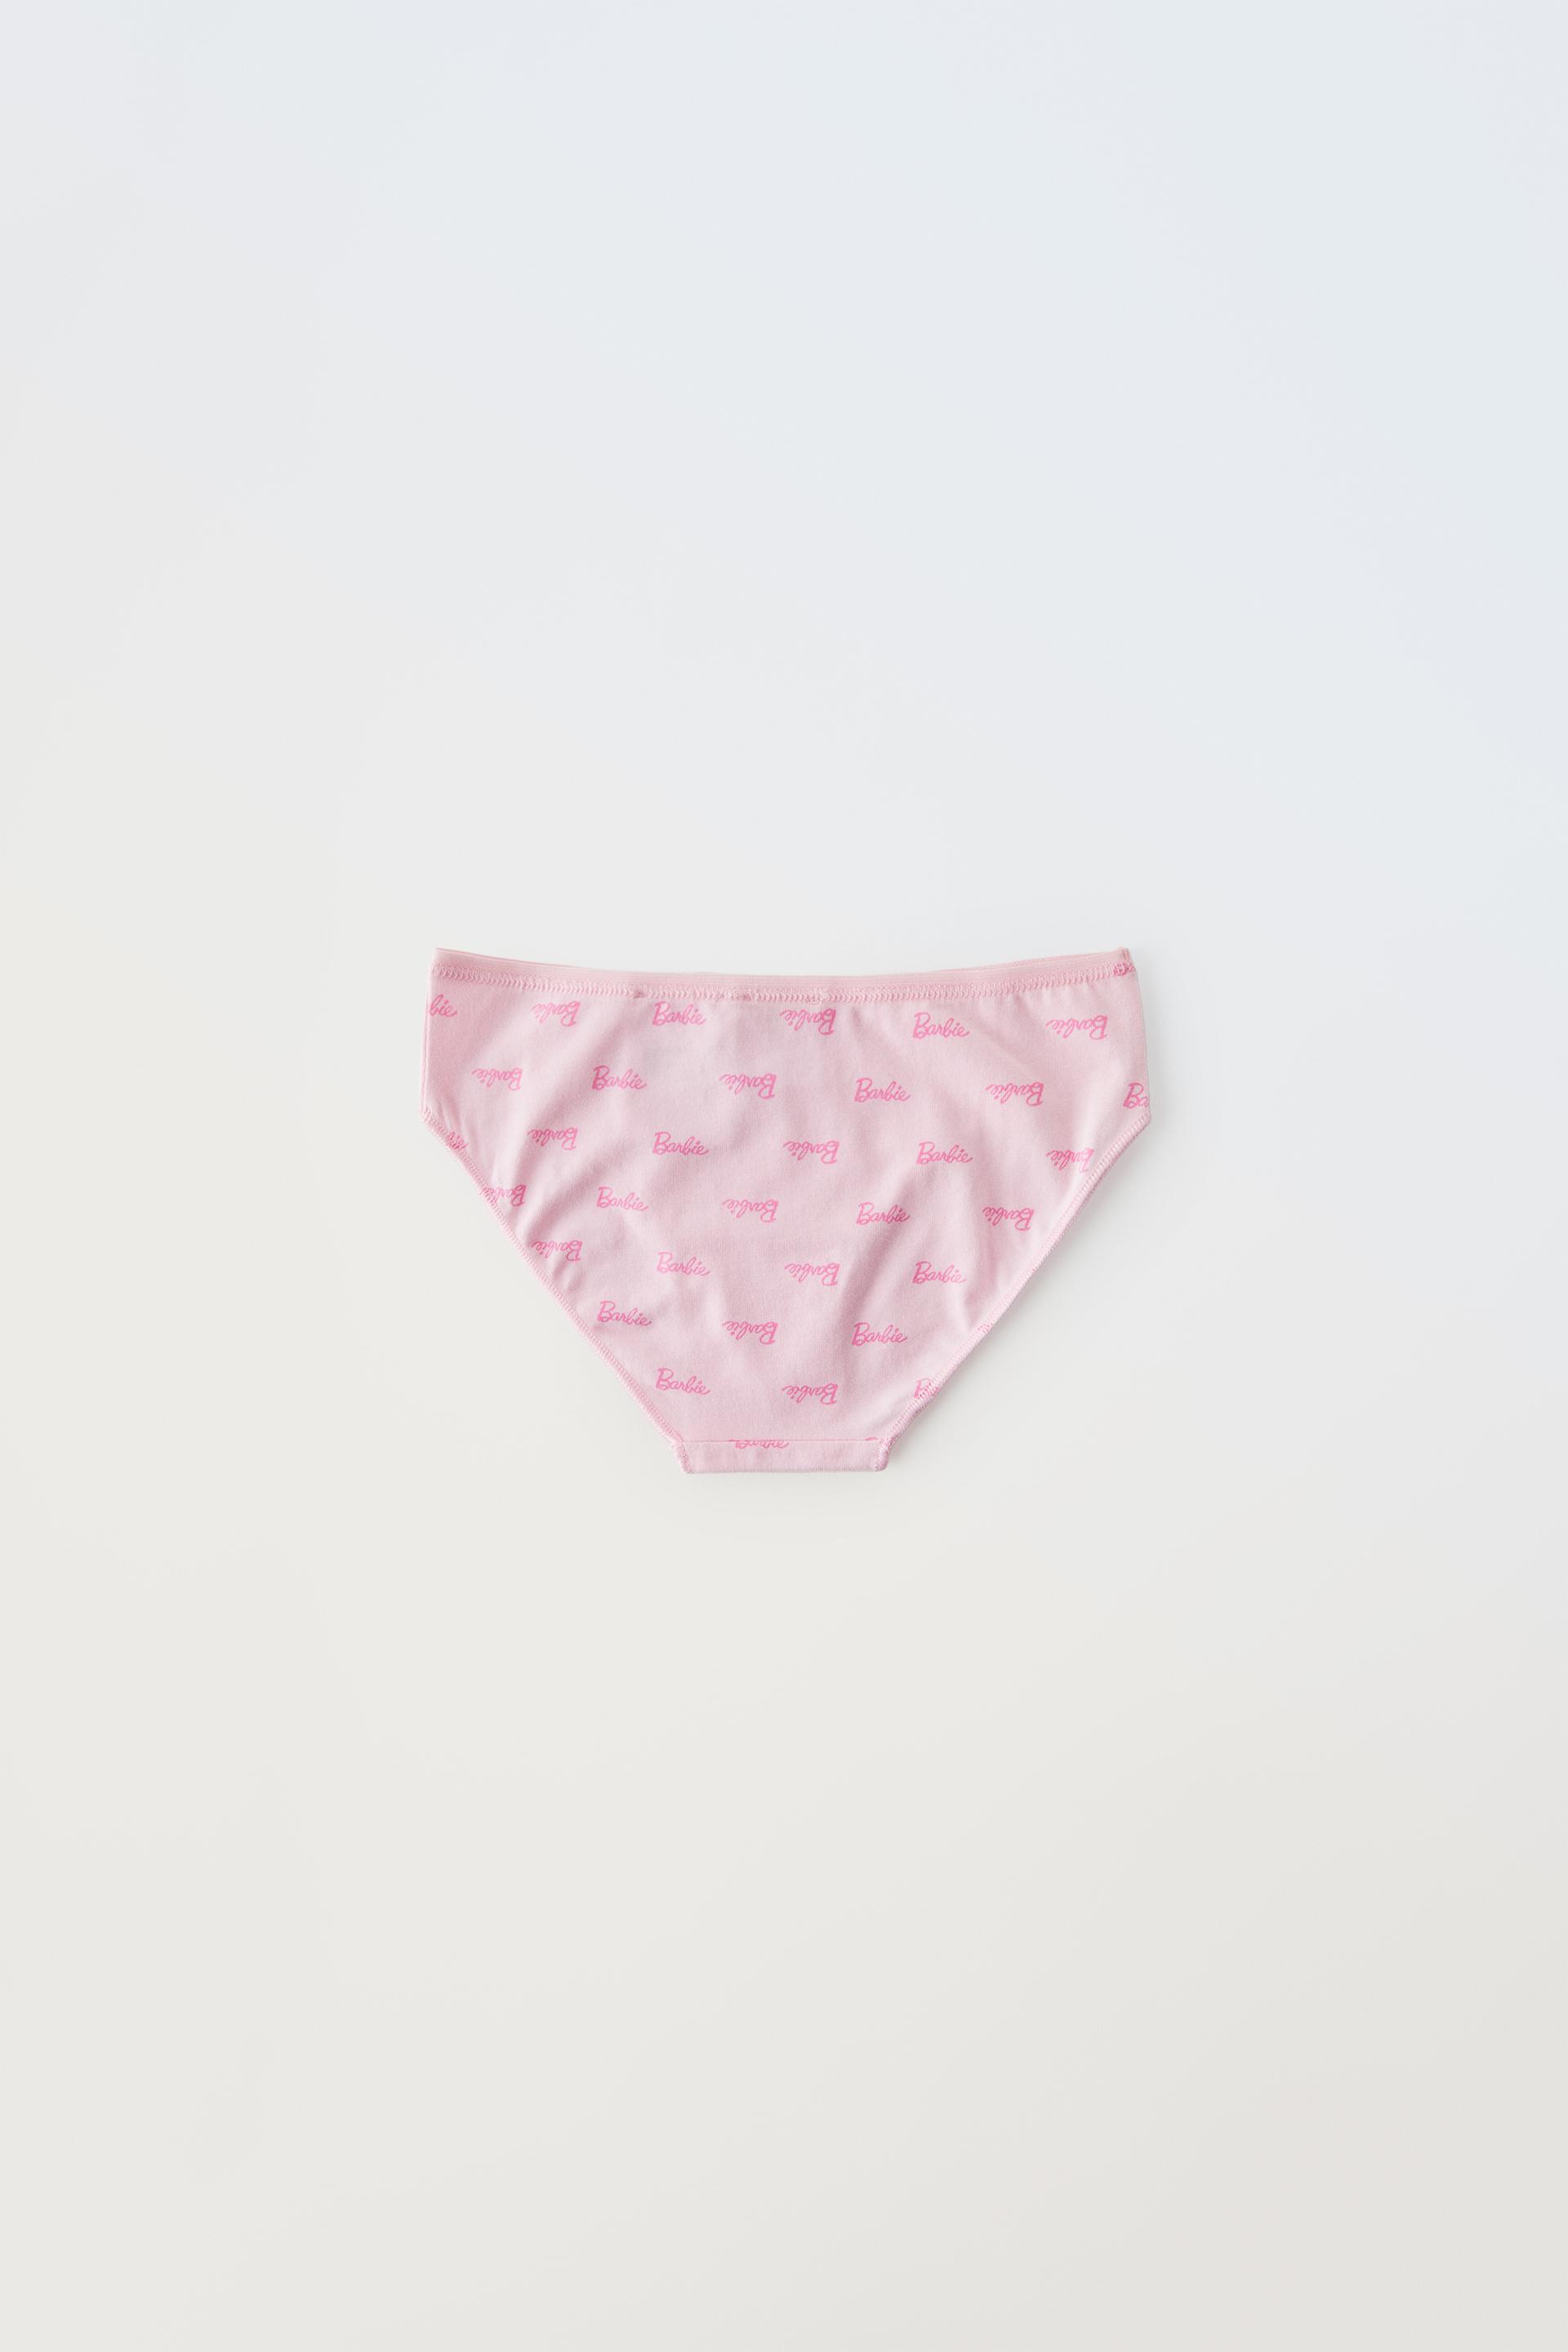 Set Of 3 Cute Pink Cotton Floral Panties For Girls Toddler Shorts And Boxers  For Fun And Learning Childrens Clothing From Kong06, $14.77